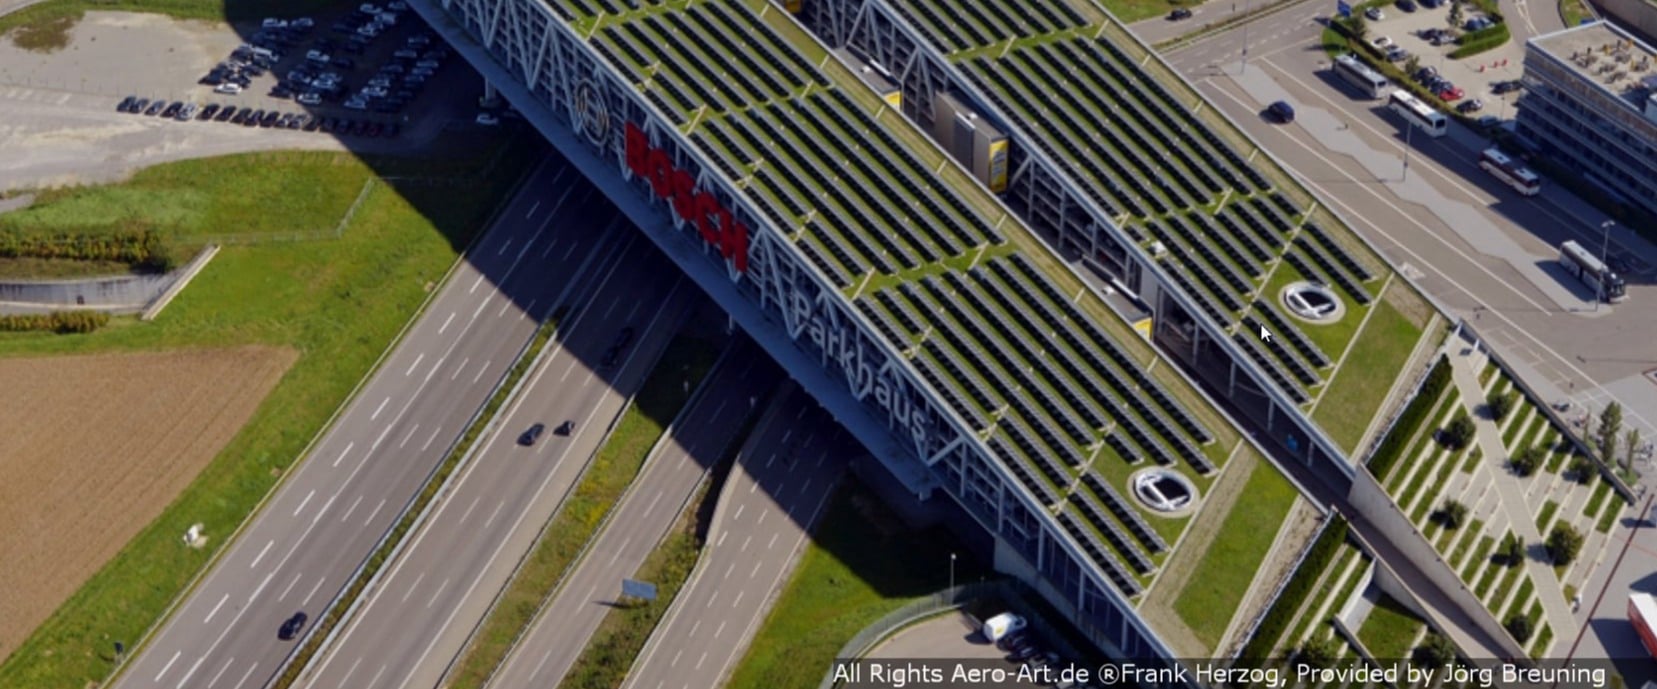 Largest Solar Green roof in the world